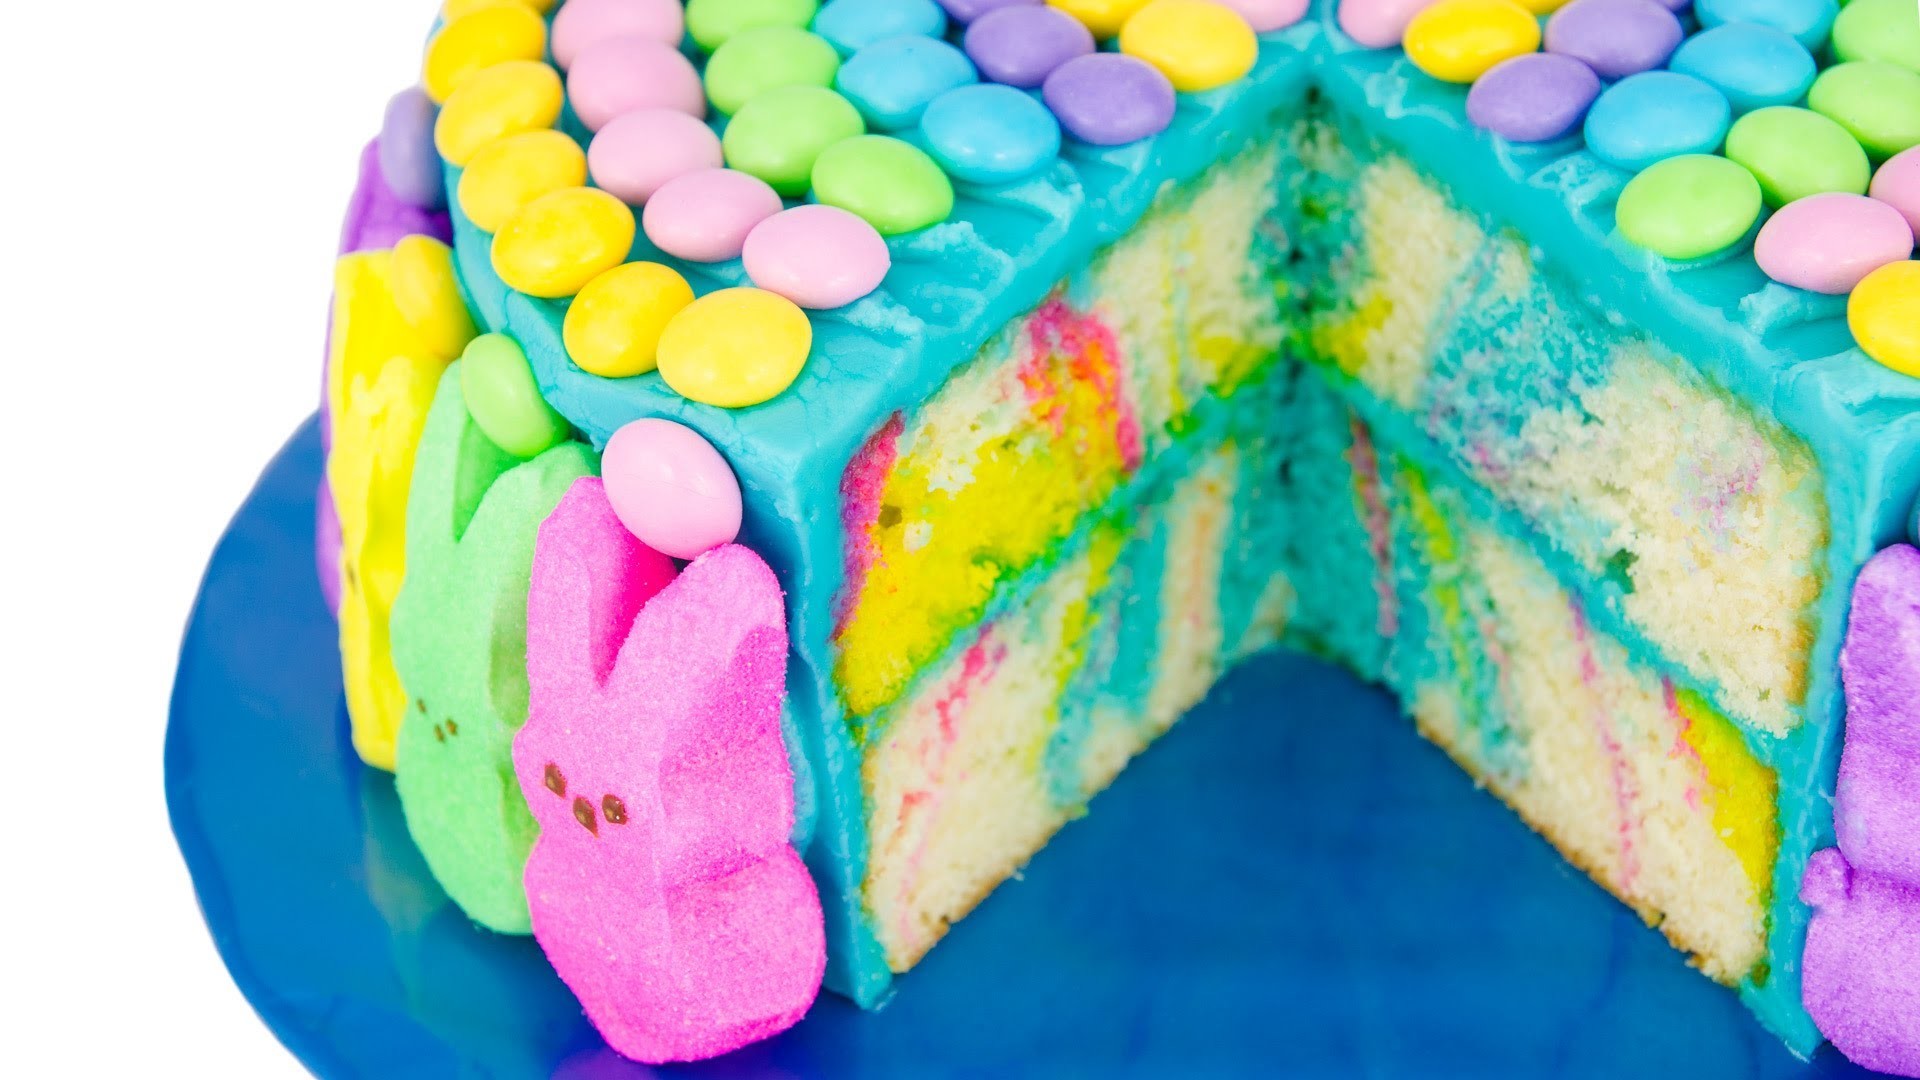 Easter Cake Wallpaper - Easter Cakes With Peeps - HD Wallpaper 